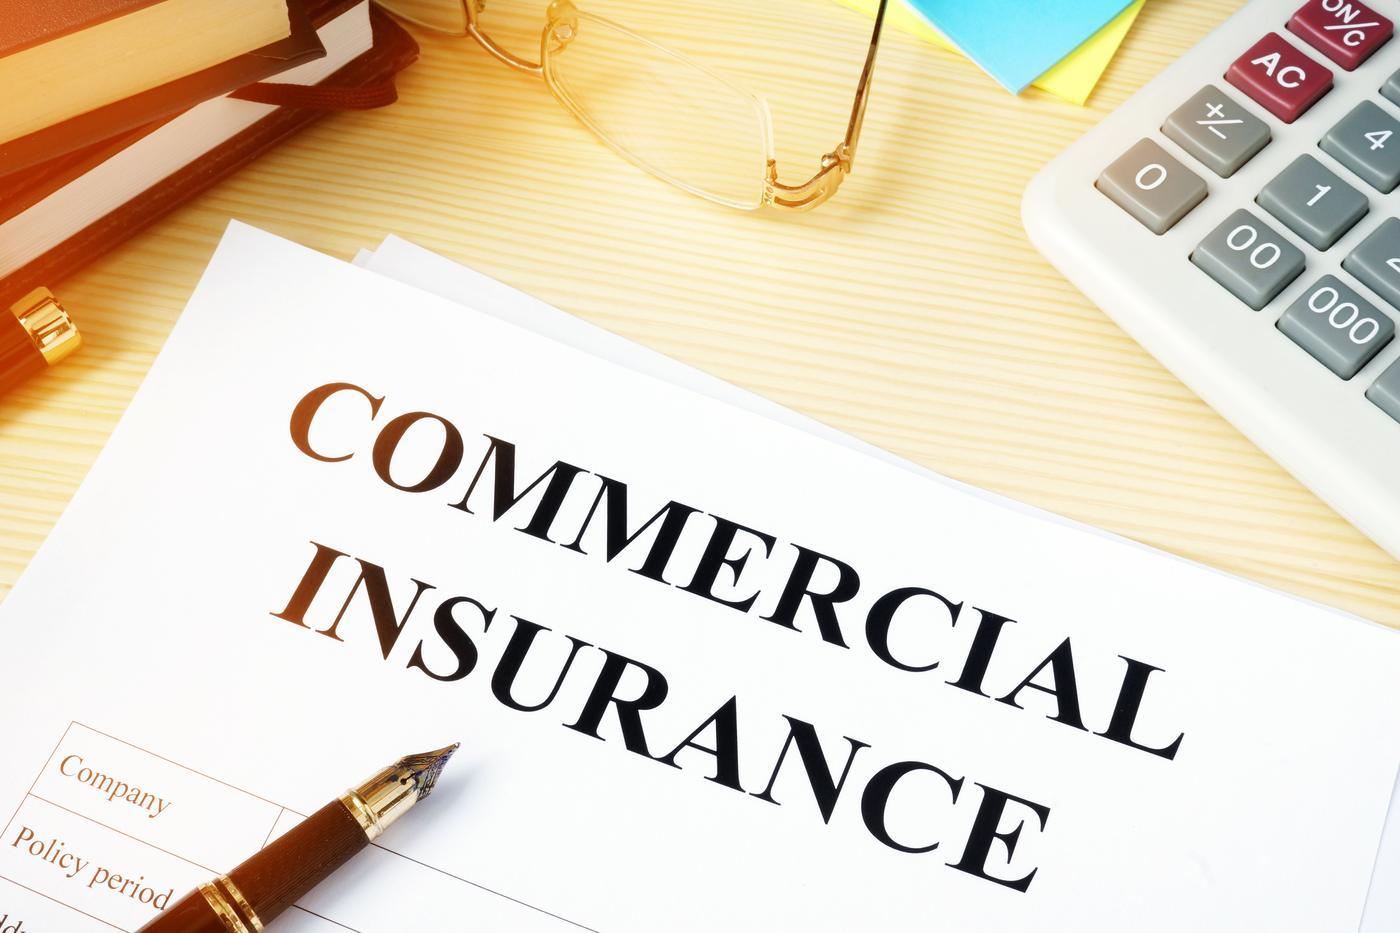 Commercial Insurance Debt Recovery - RAP